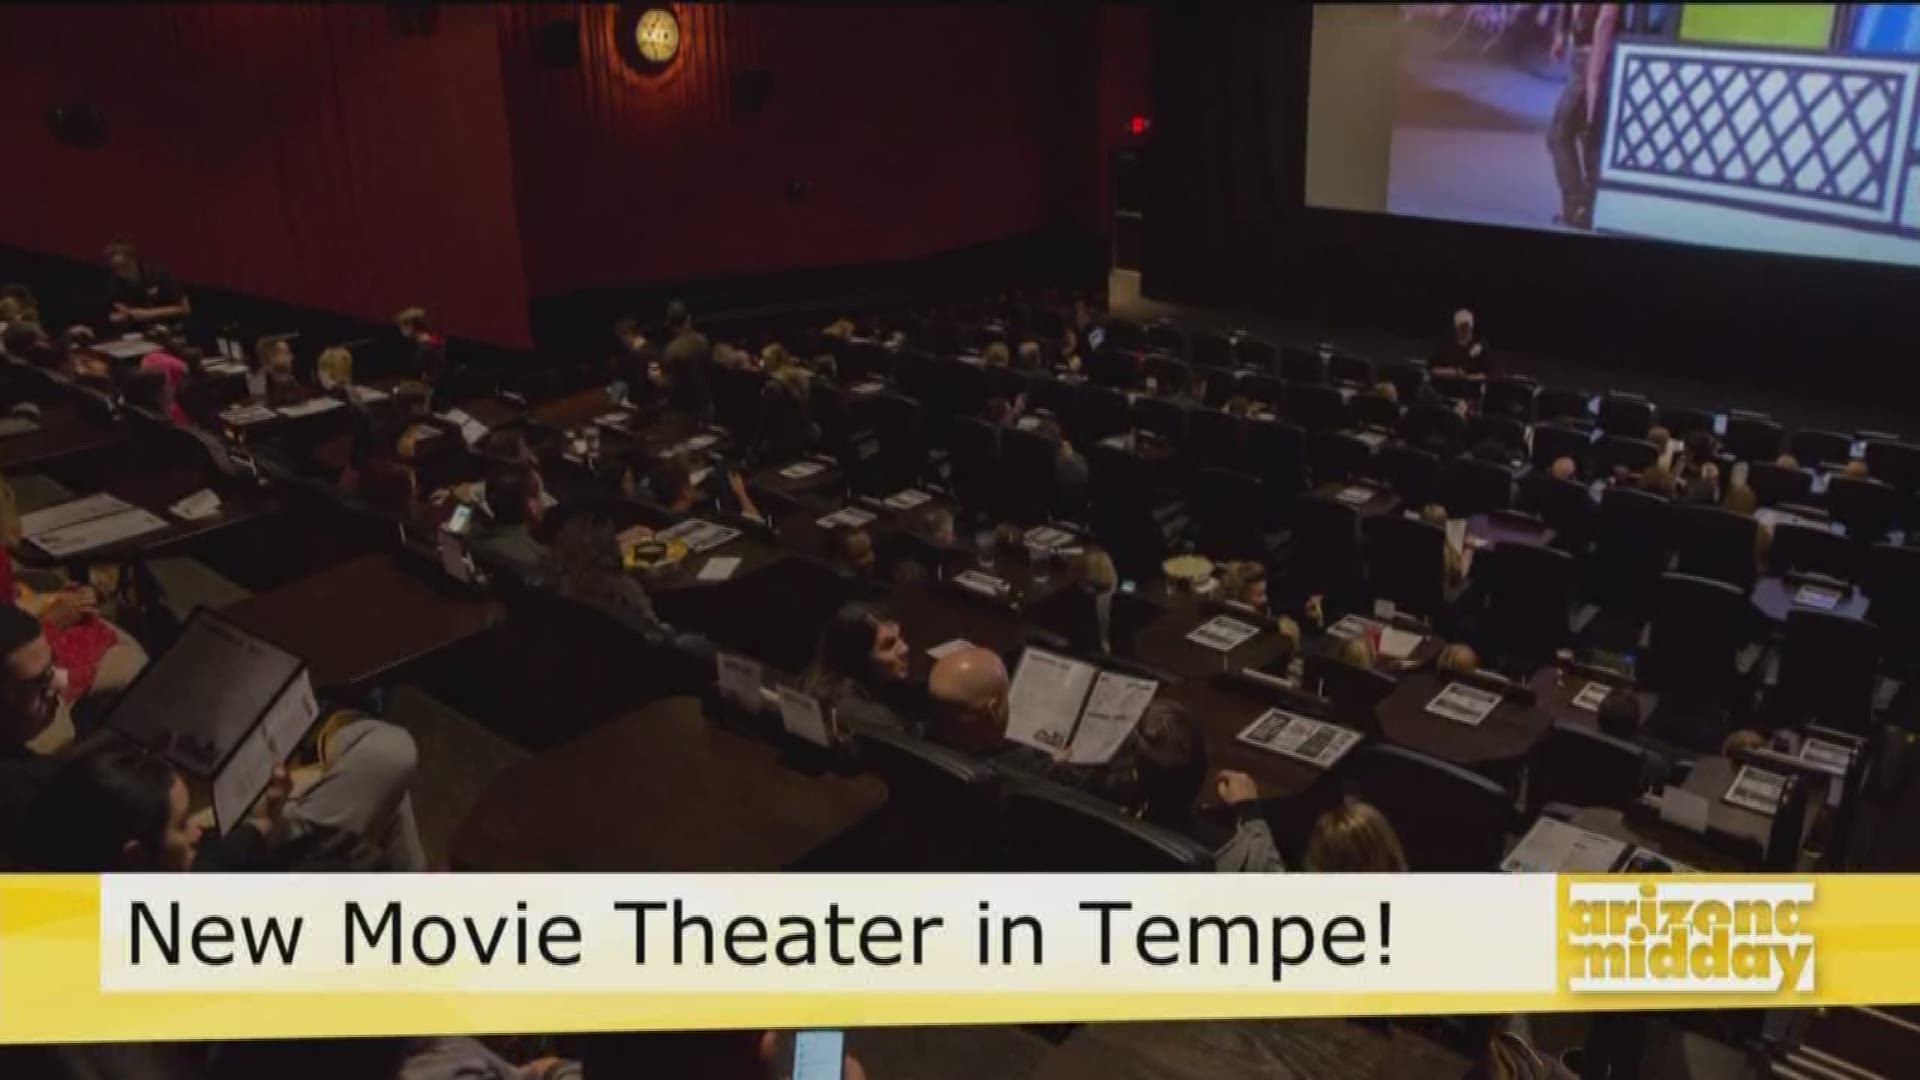 We're mixing up some fun ahead of the grand opening of Alamo Drafthouse Tempe!